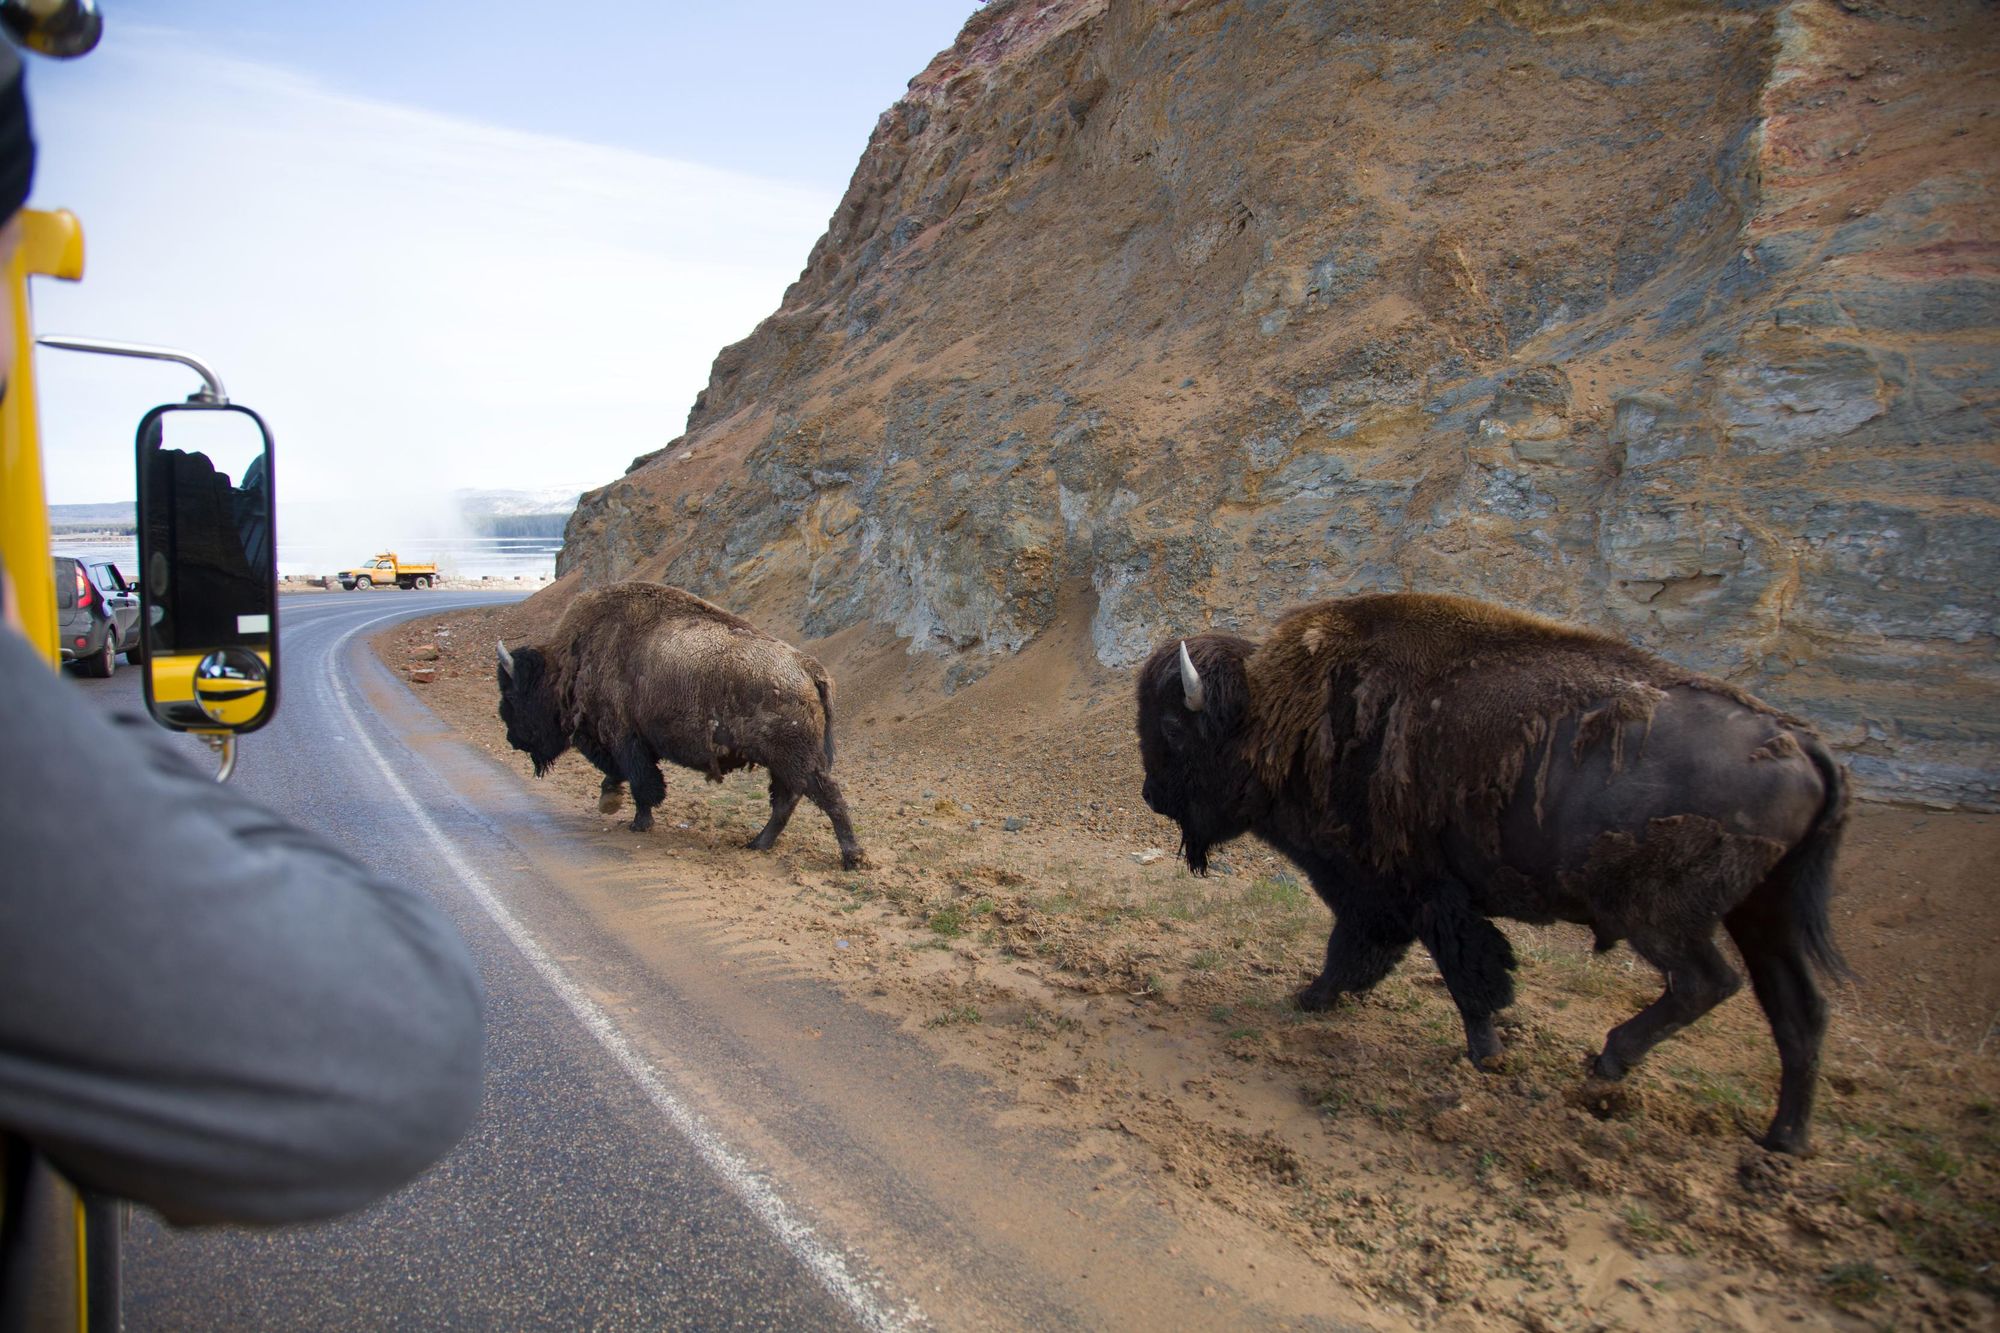 You'll spot a lot of bison as you enter Yellowstone. This can cause queues. Photo: Getty